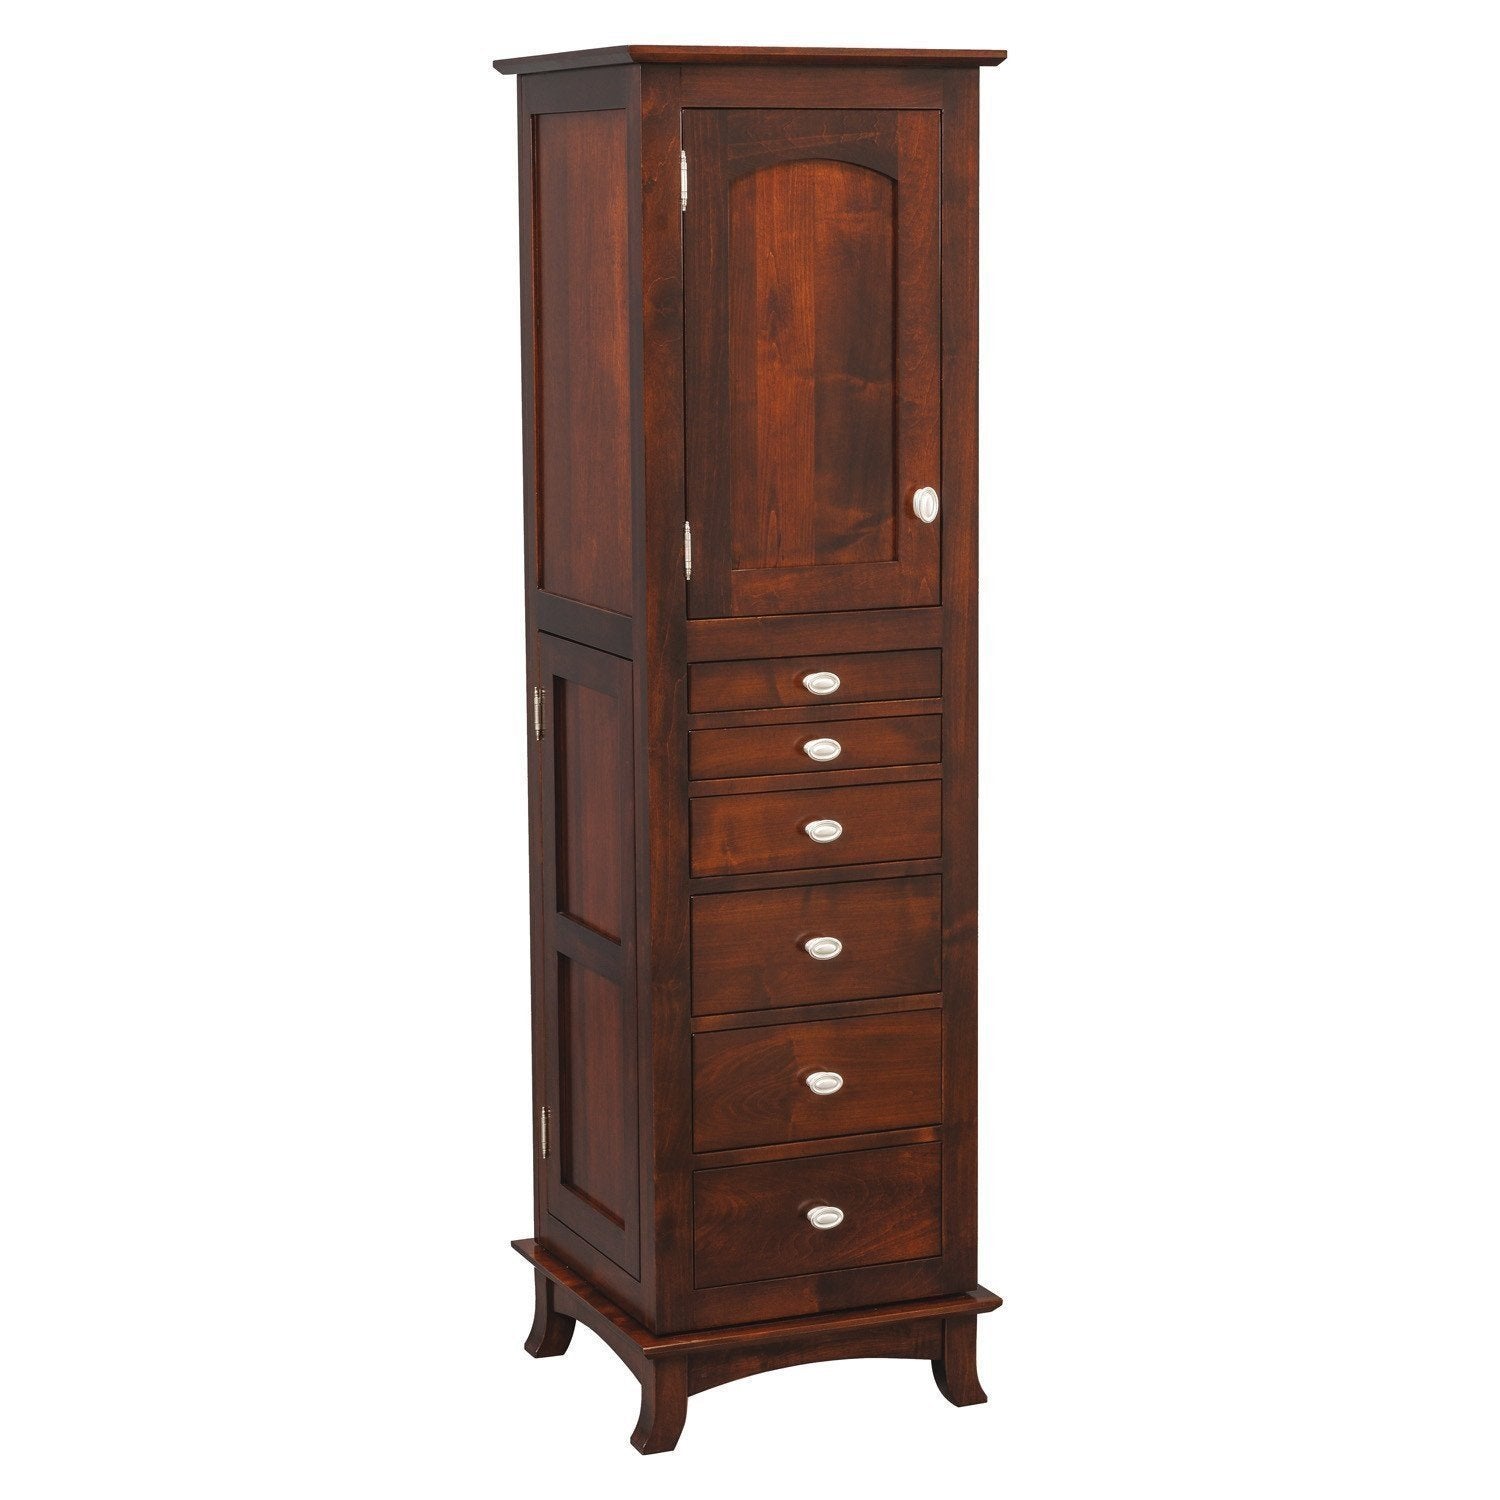 Amish Queen Anne Jewelry Armoire from DutchCrafters Amish Furniture